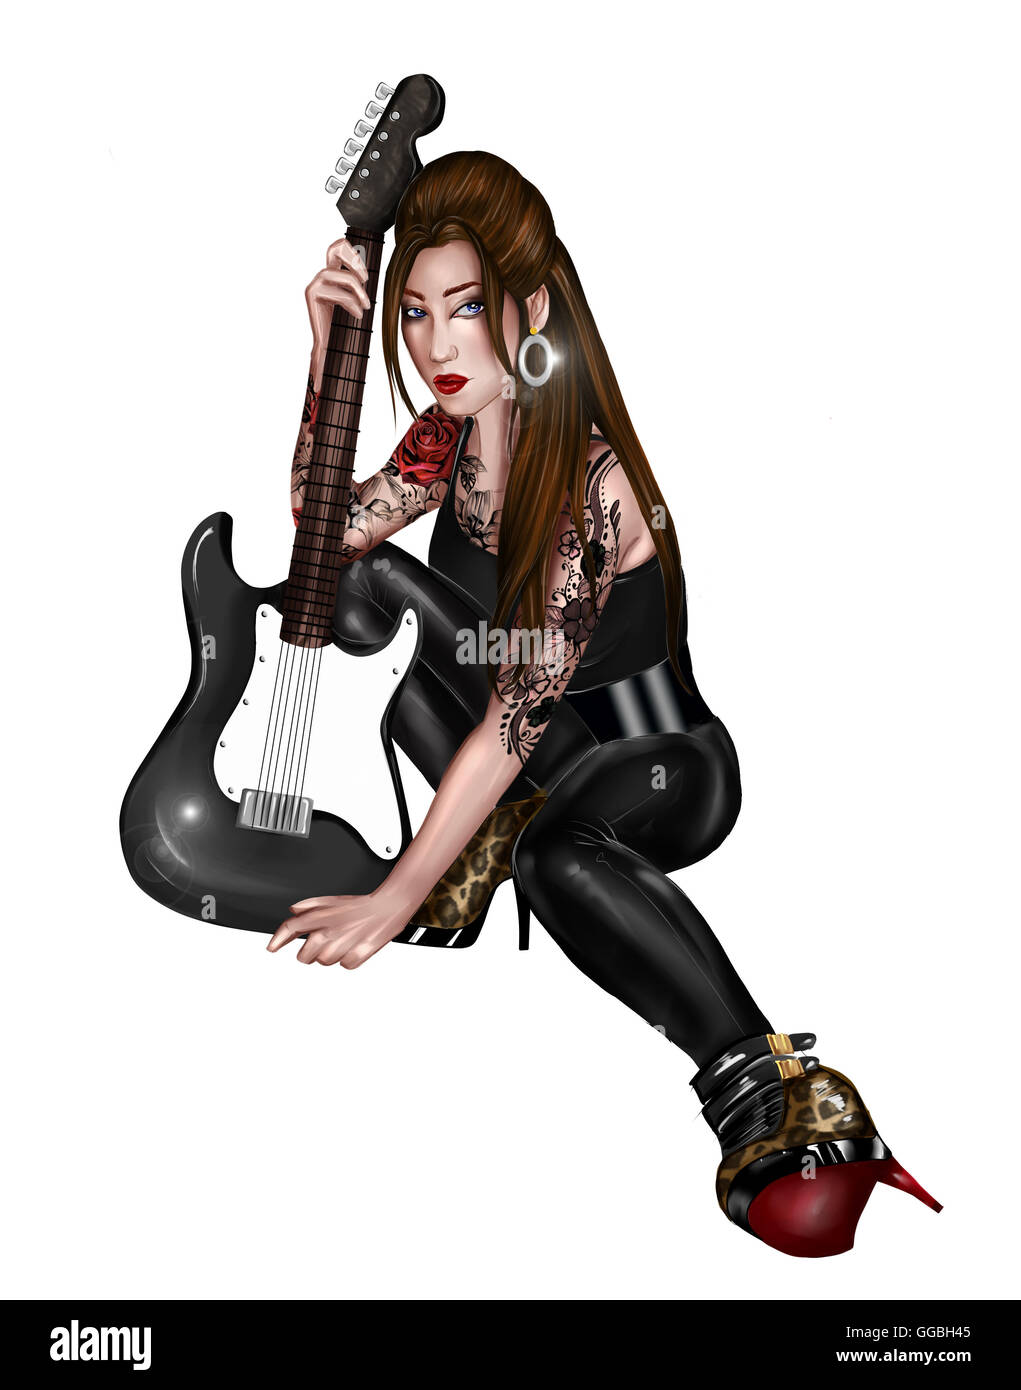 DIGITAL ILLUSTRATION OF A BEAUTIFUL GIRL WITH ELECTRIC GUITAR Stock Photo